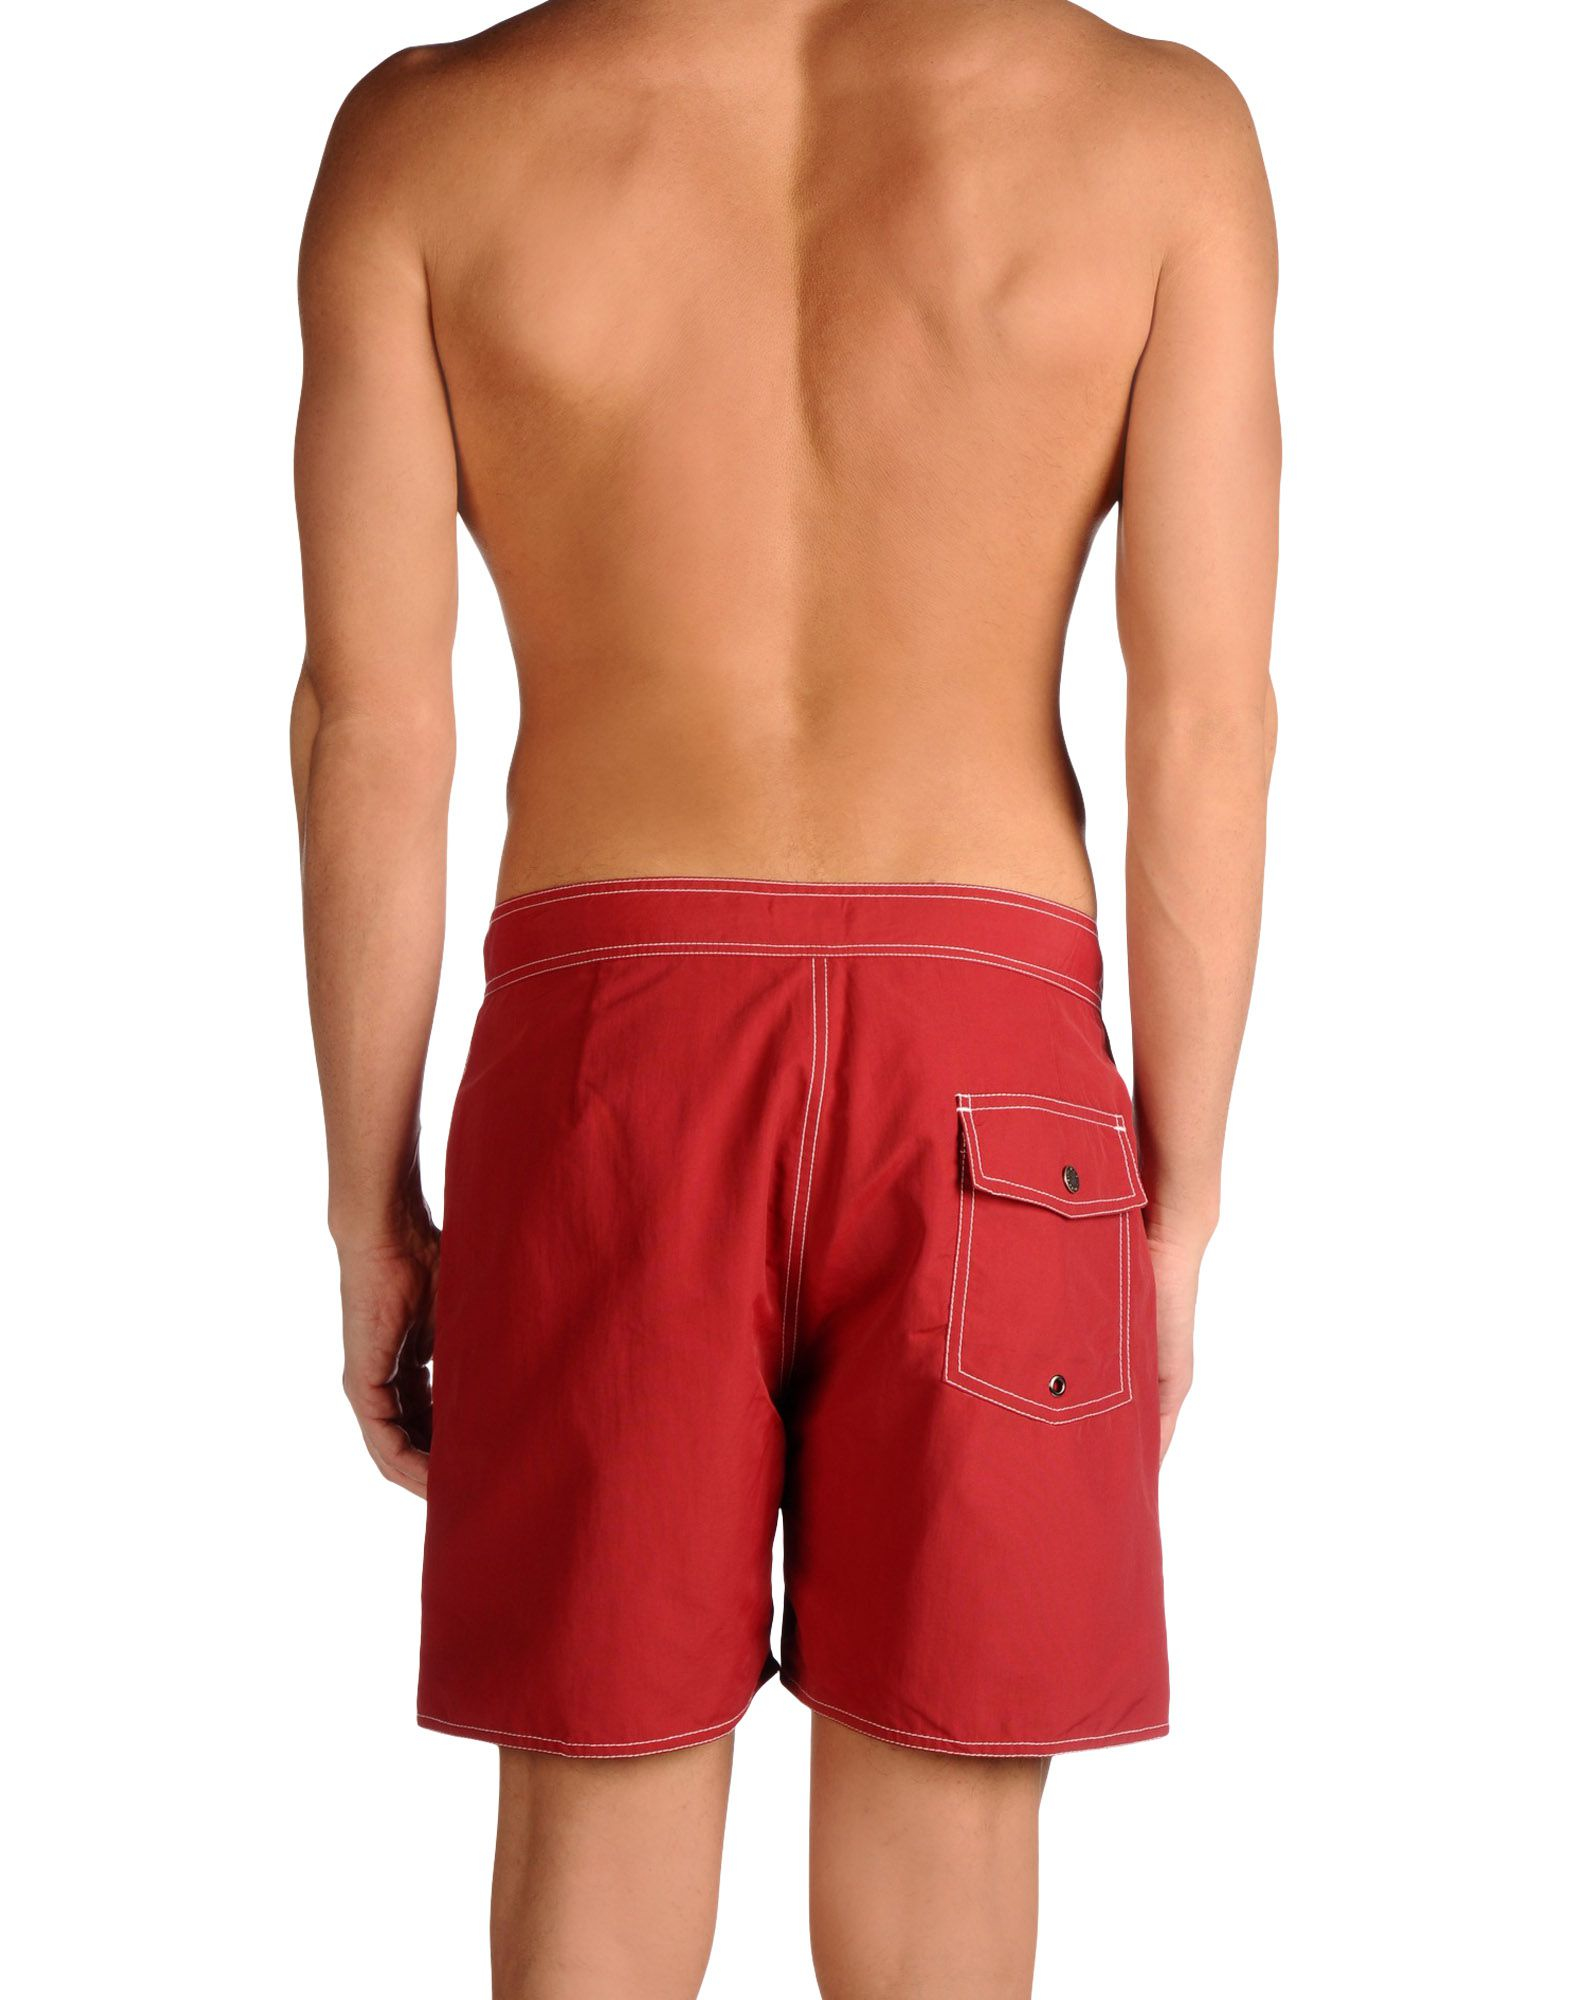 Lyst - Saturdays Nyc Swimming Trunks in Red for Men